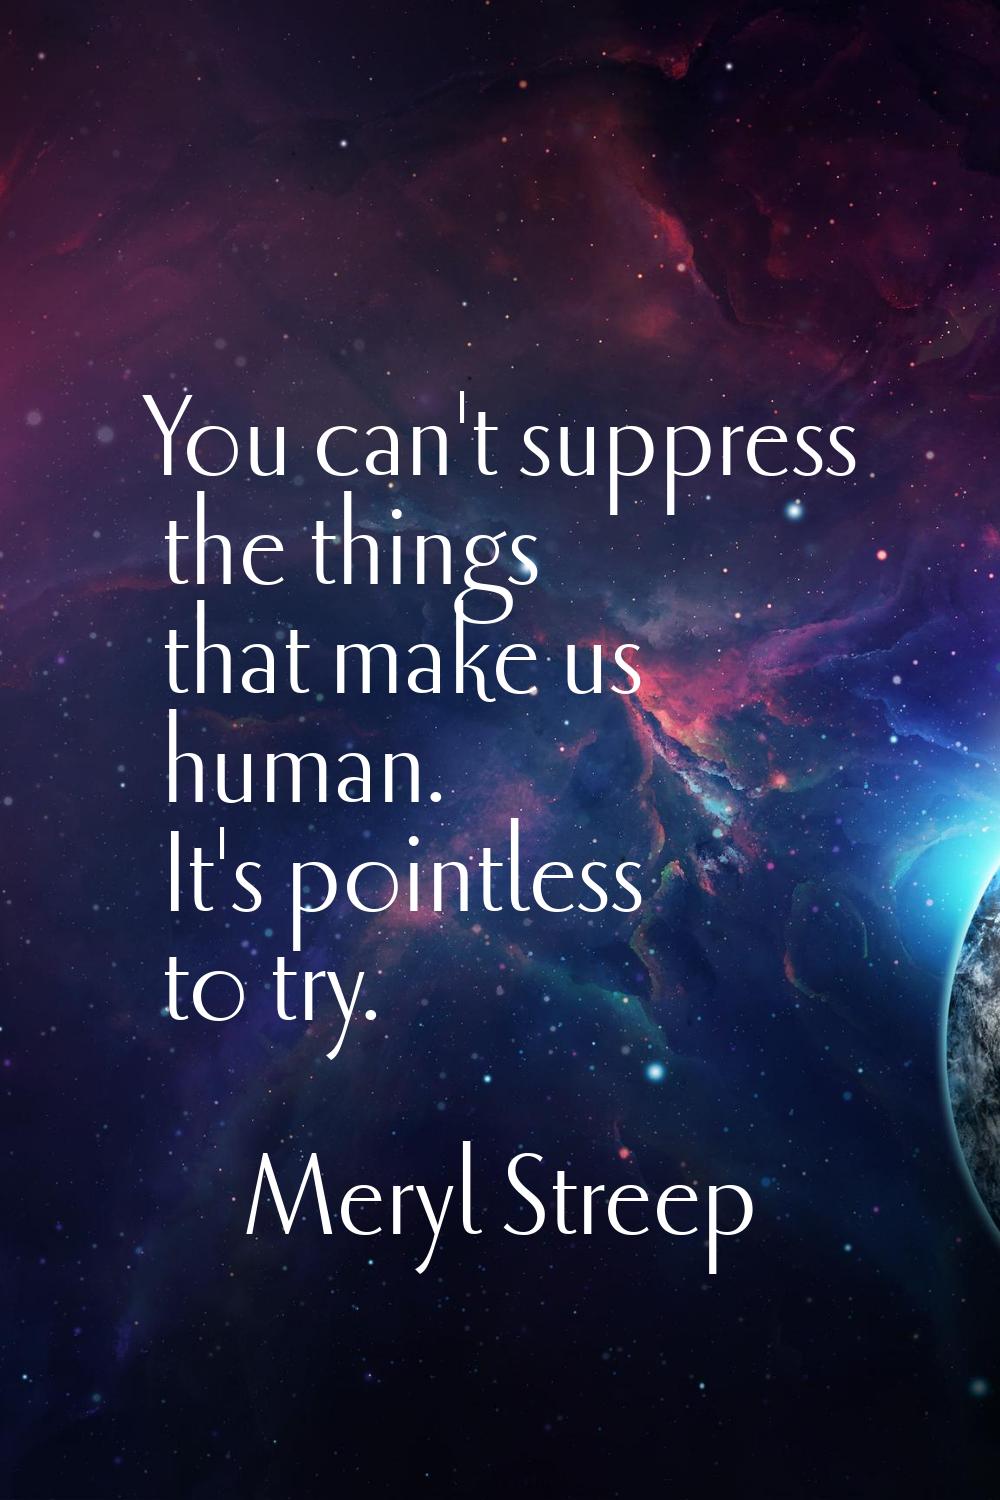 You can't suppress the things that make us human. It's pointless to try.